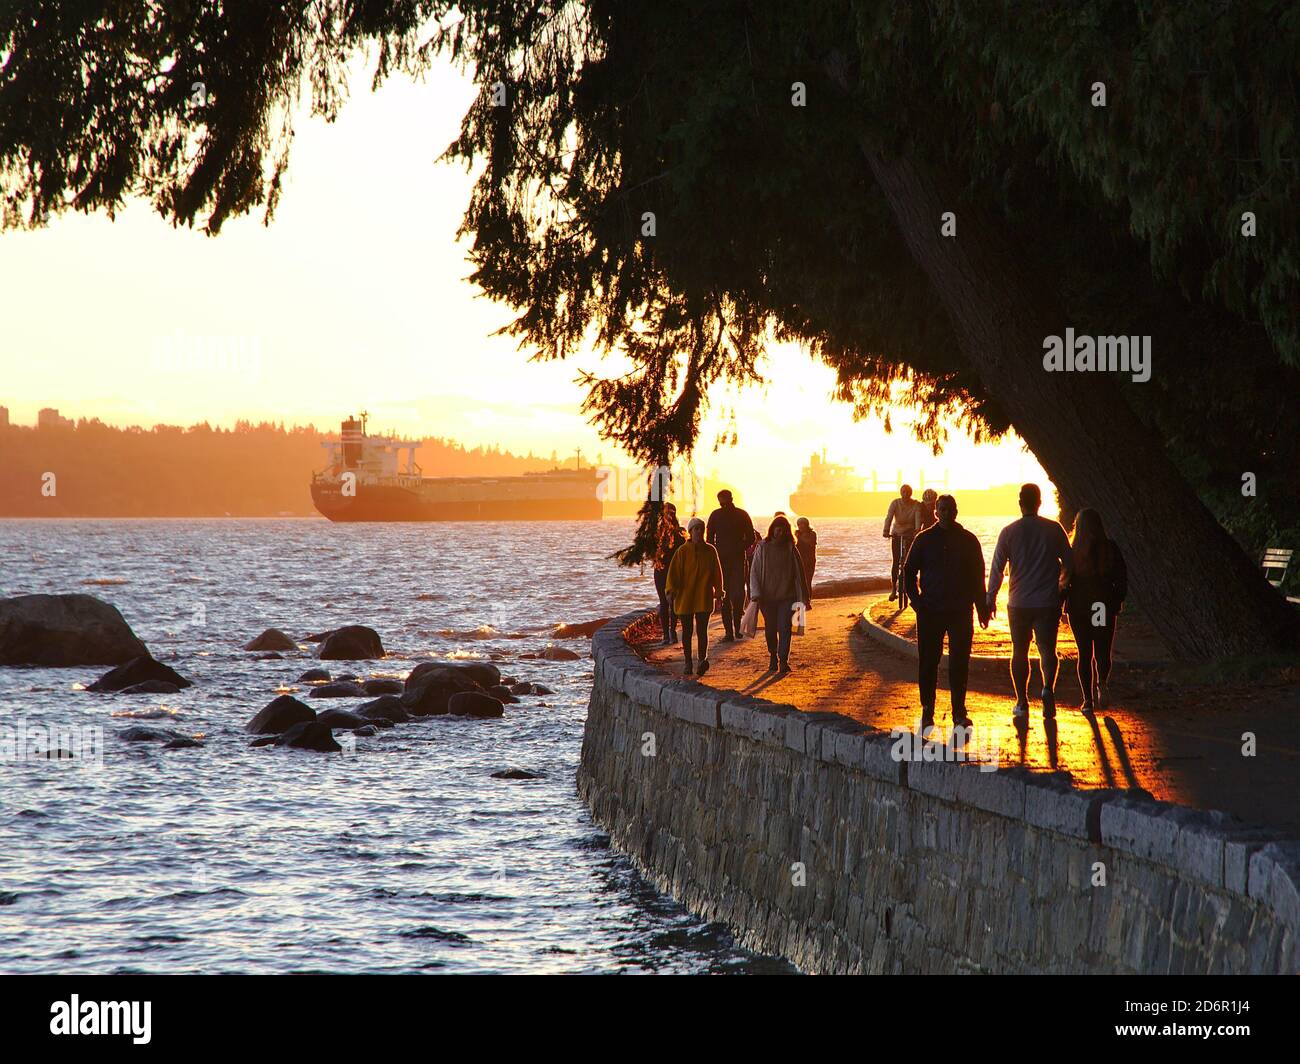 October 2020, Vancouver, Canada - People walking, running and jogging along the Stanley Park seawall. Anchored ships visible in the background. Stock Photo